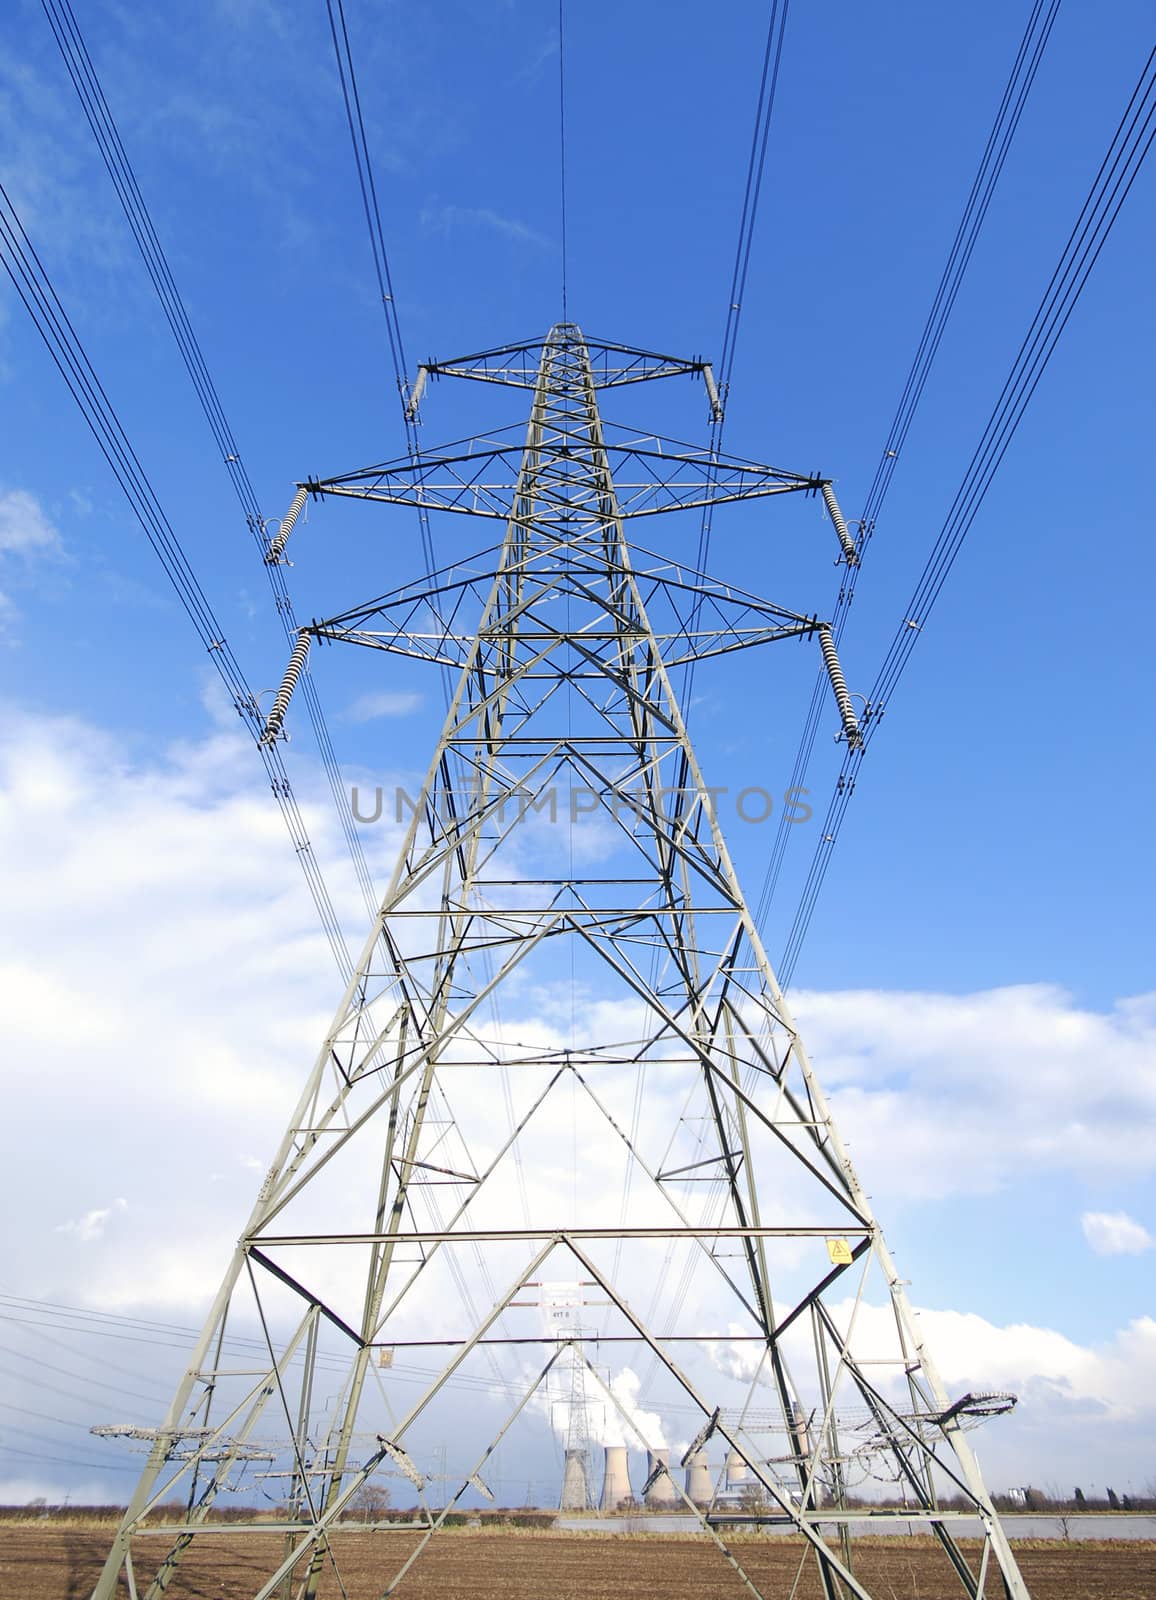 View of electricity pylon with power lines